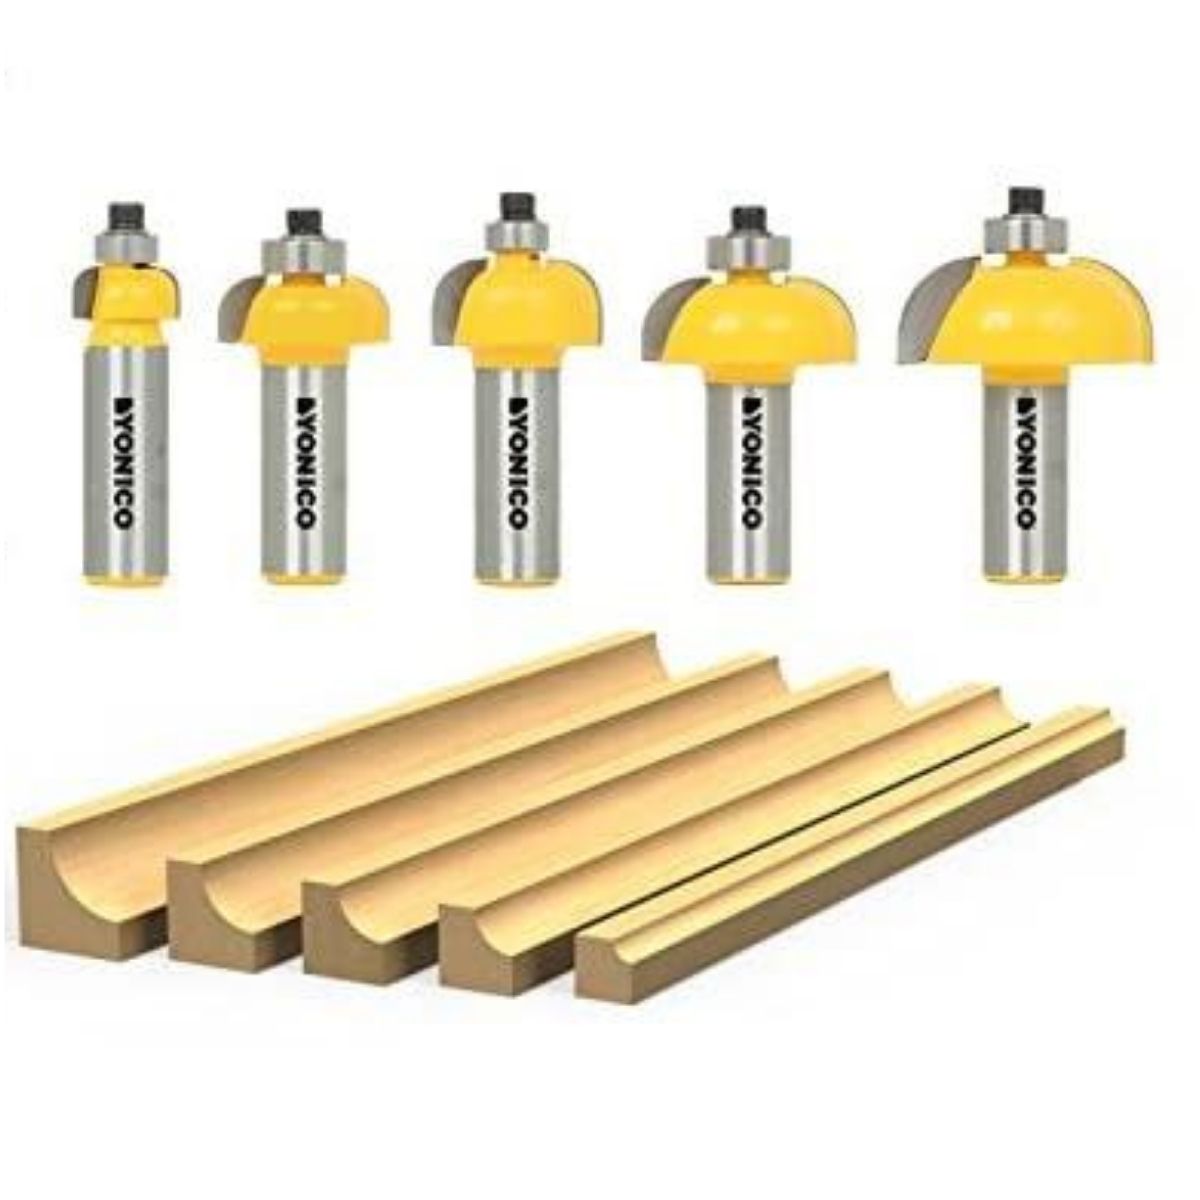 The Router Bit Types Option: Cove